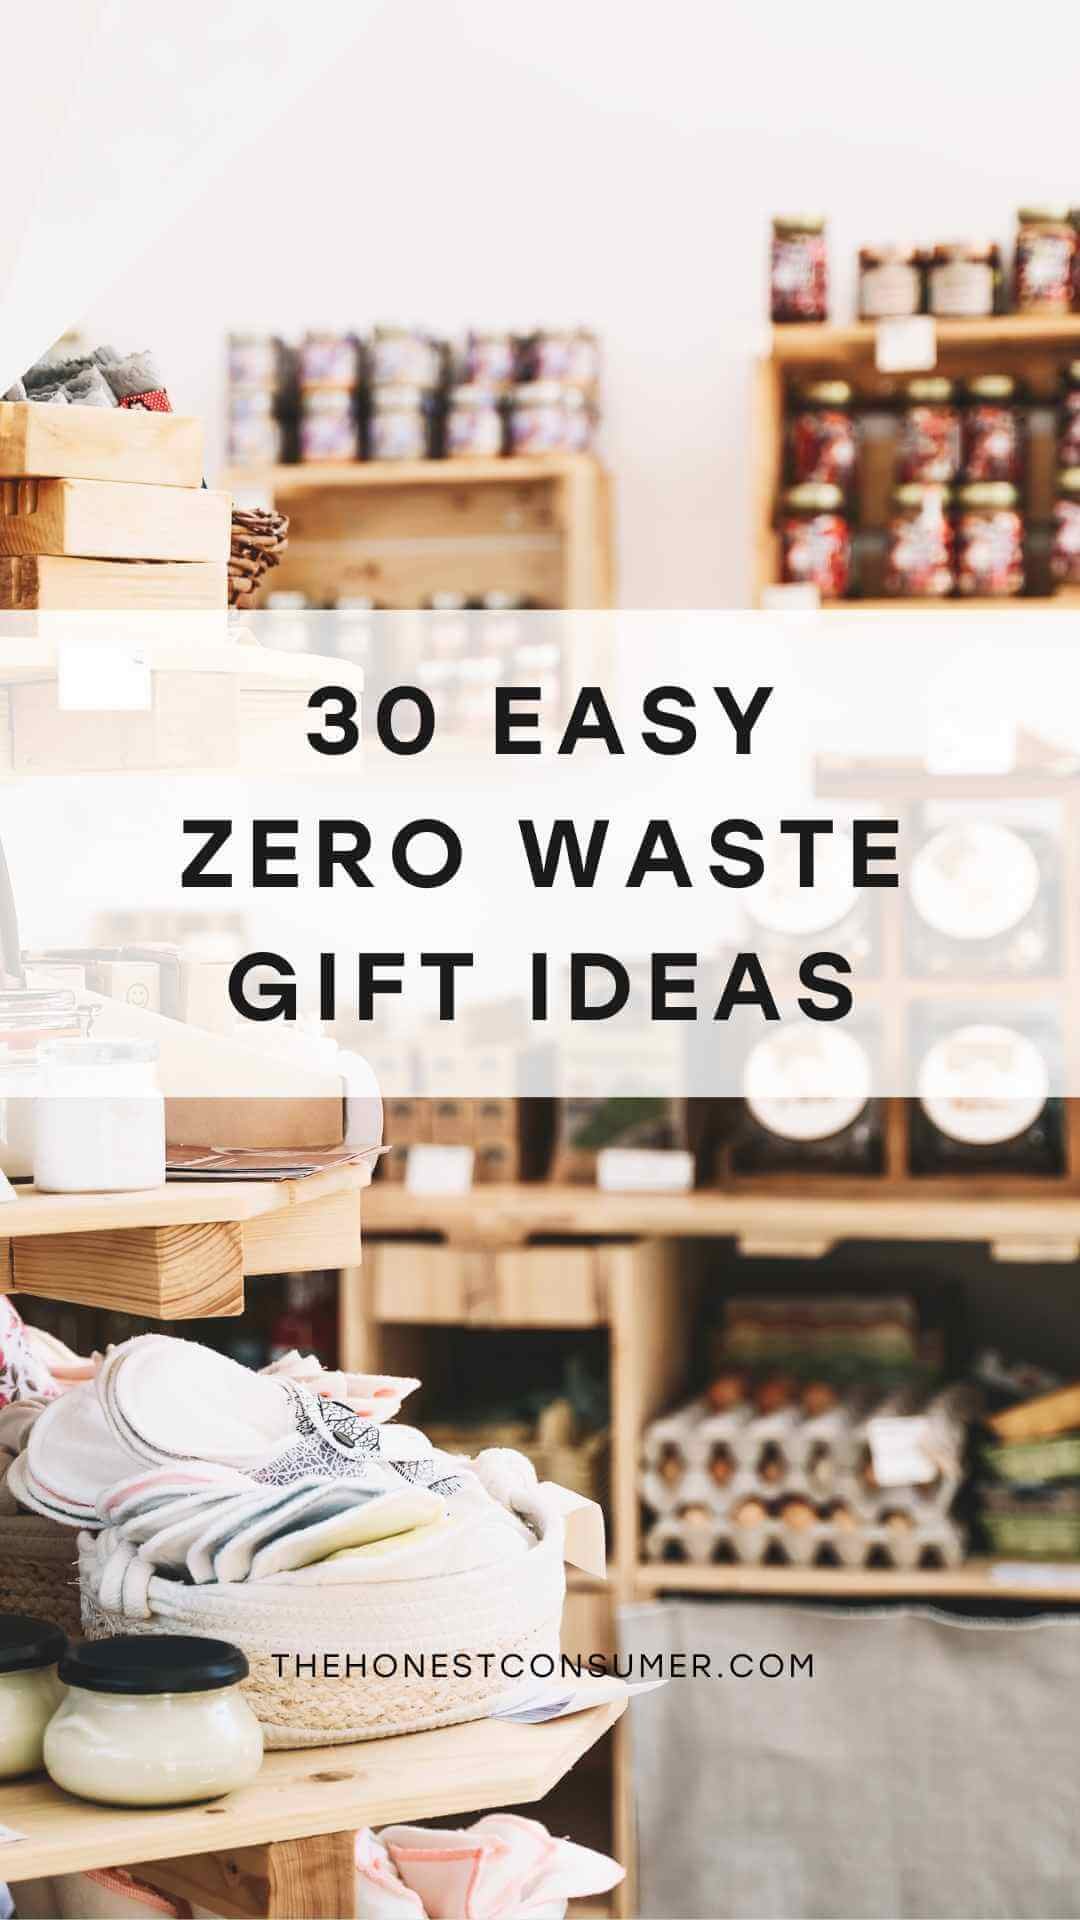 Small Business Gift Ideas (30+ Ideas to Shop Small This Christmas!)